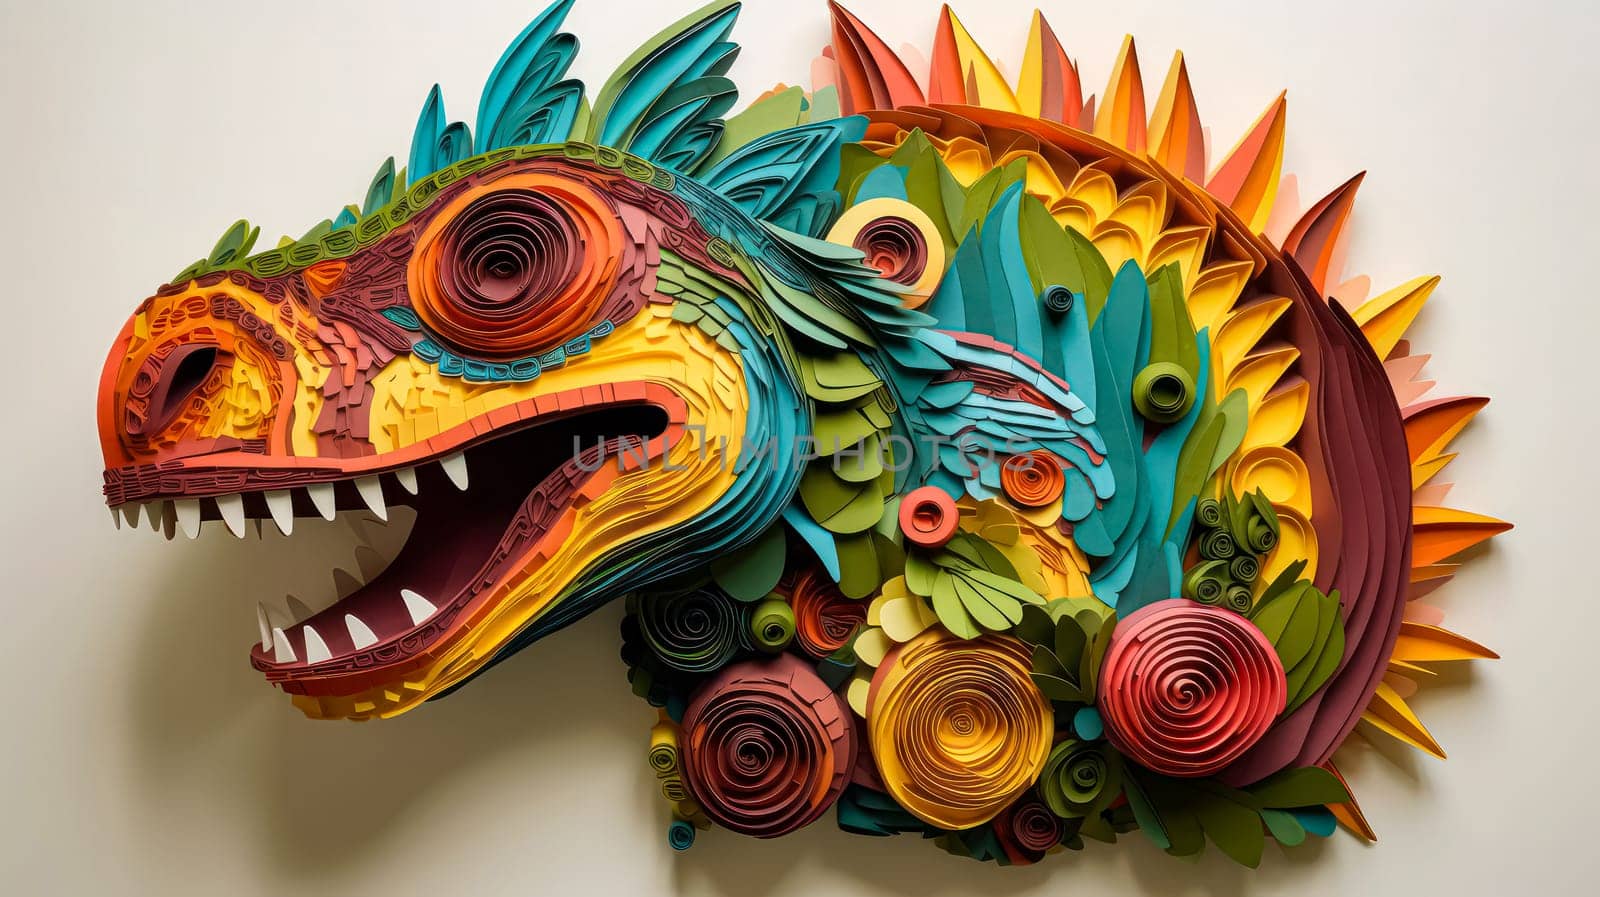 A paper dragon with a mouth open and a blue eye. The dragon is surrounded by colorful flowers and leaves